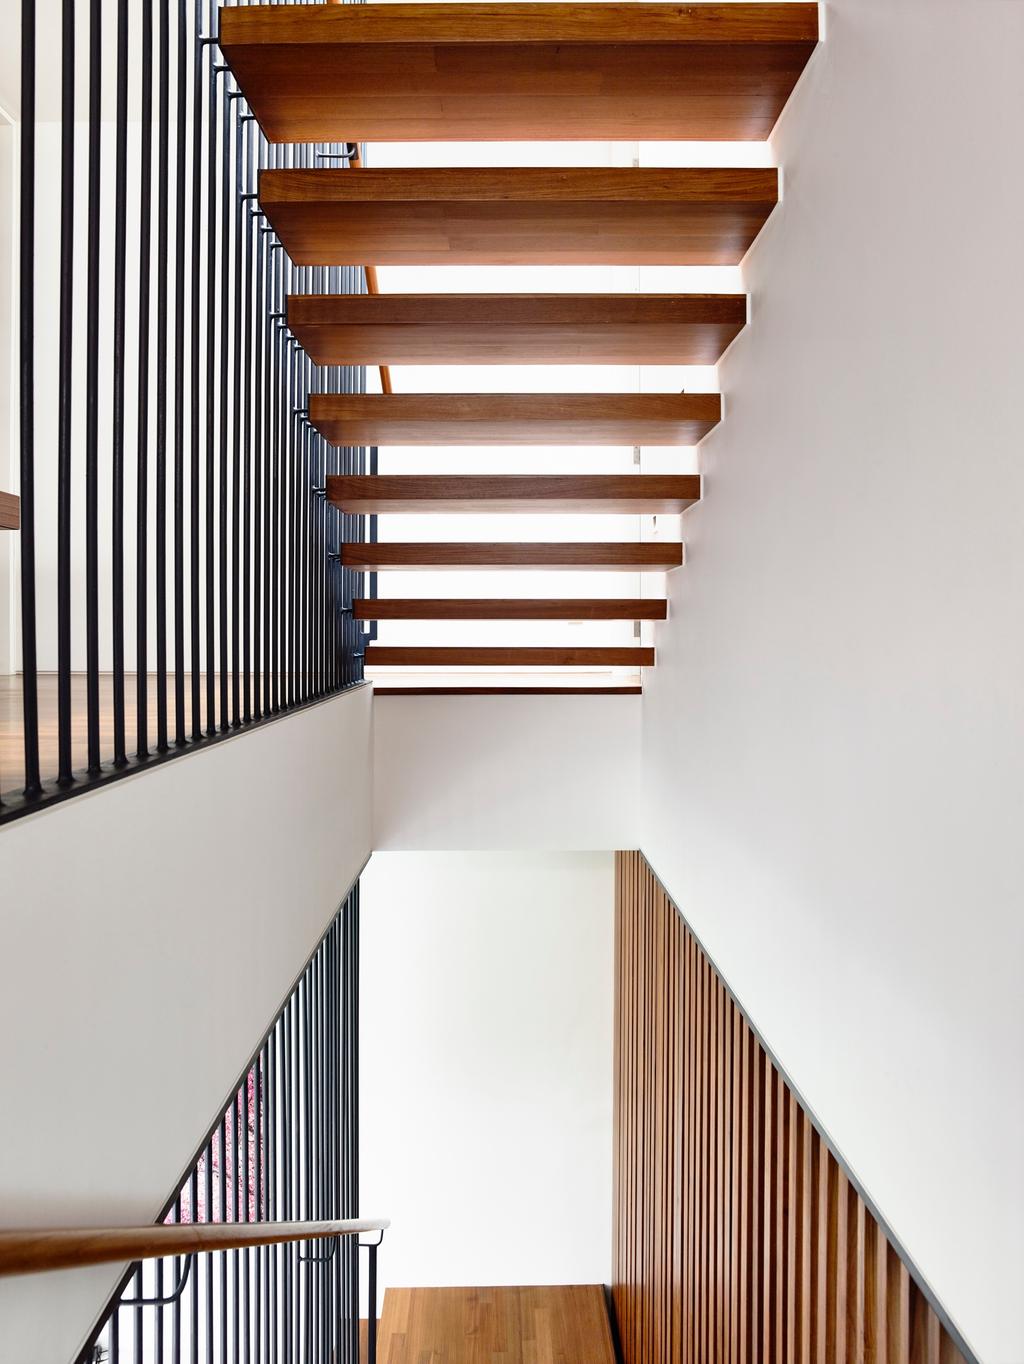 Modern, Landed, Greenwood Avenue, Architect, HYLA Architects, Banister, Handrail, Staircase